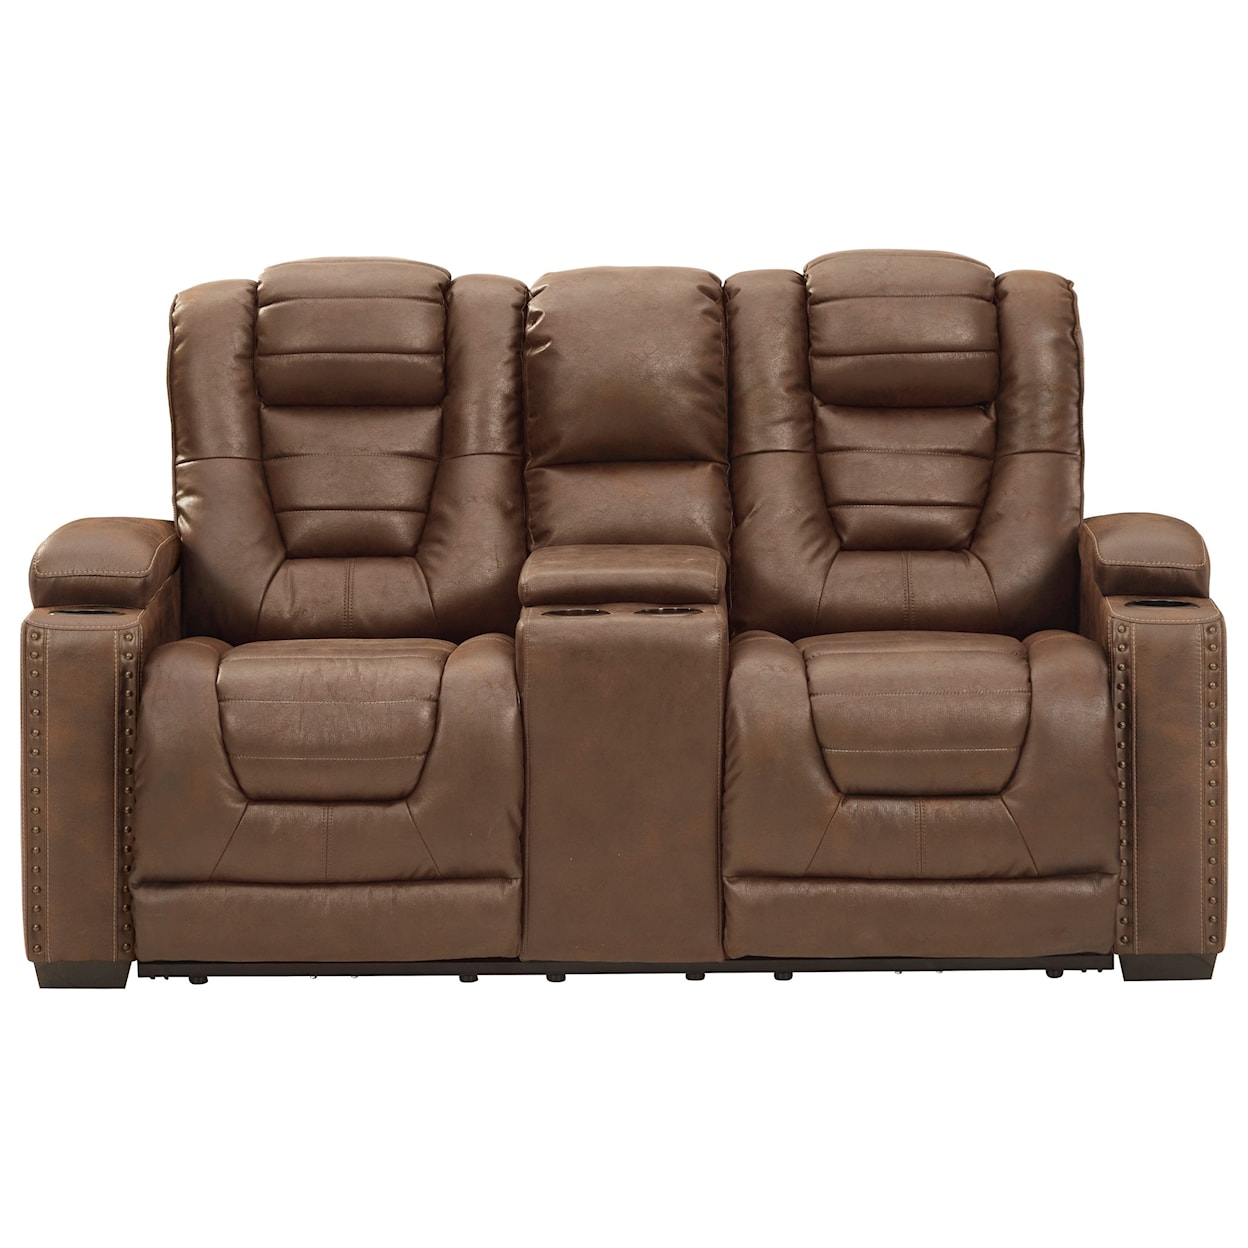 Ashley Furniture Signature Design Owner's Box Power Rec Loveseat w/ Console & Adj Hdrsts